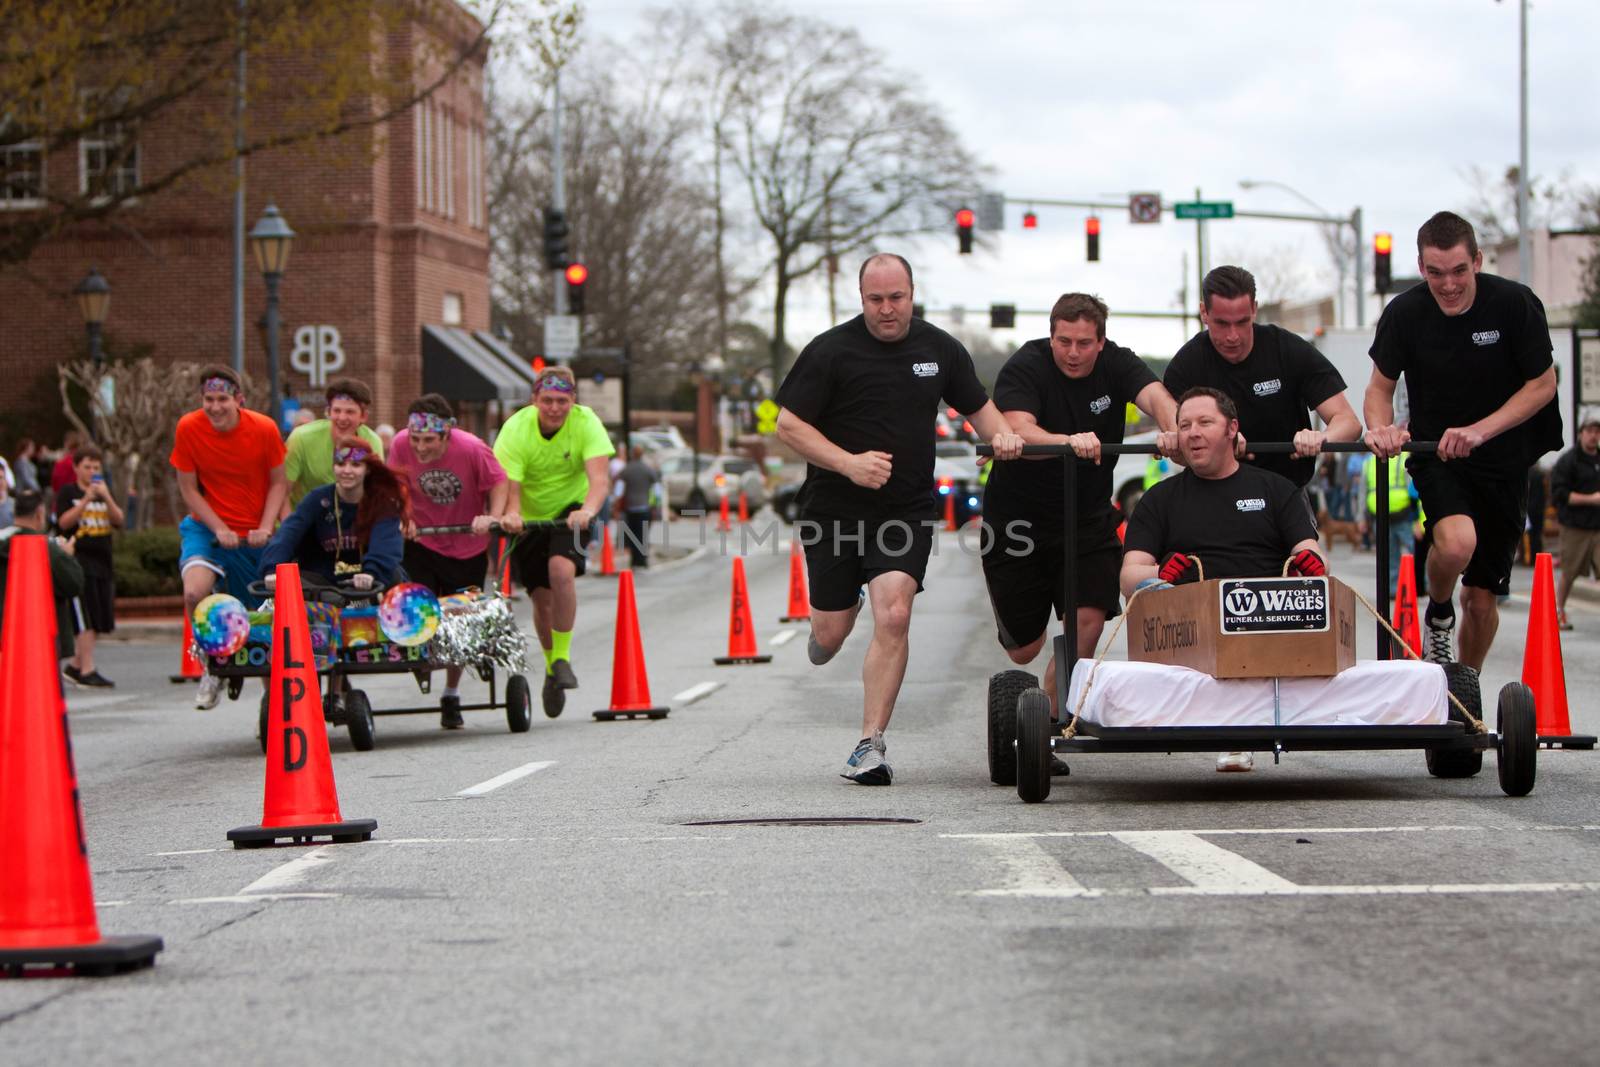 Lawrenceville, GA, USA - March 29, 2014:  Two teams race custom designed beds through downtown Lawrenceville, to benefit a local homeless shelter. 